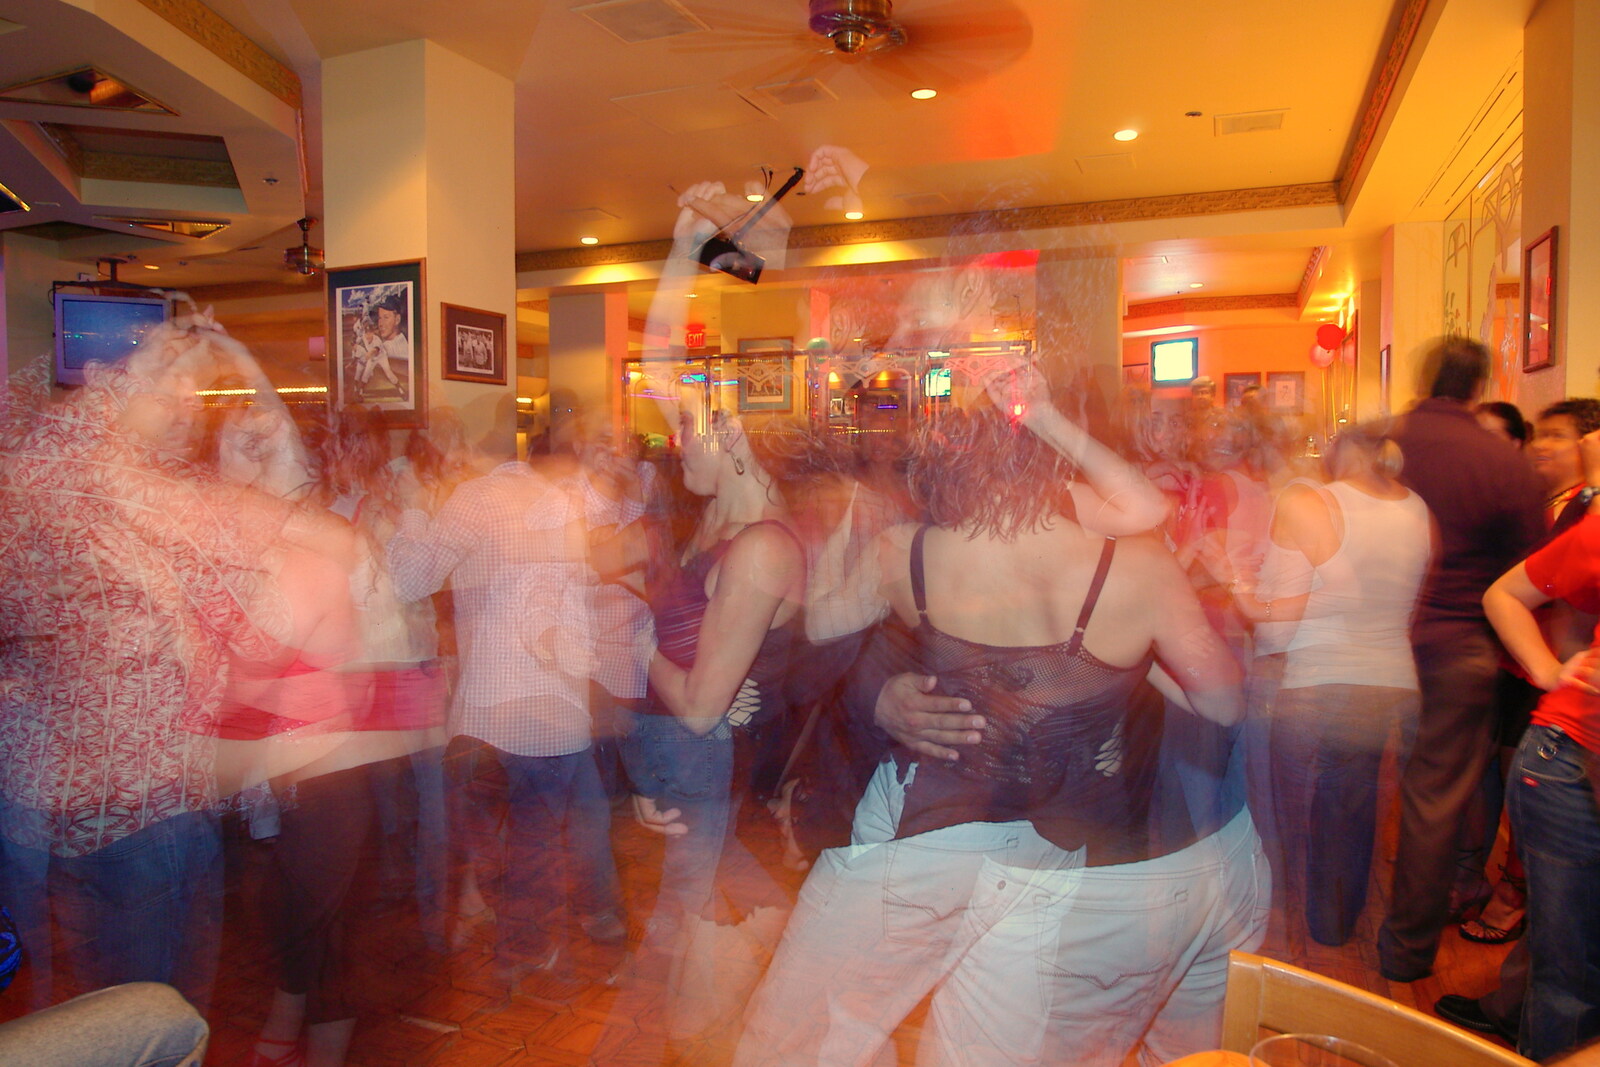 Salsa dancing from San Diego Four, California, US - 22nd September 2005